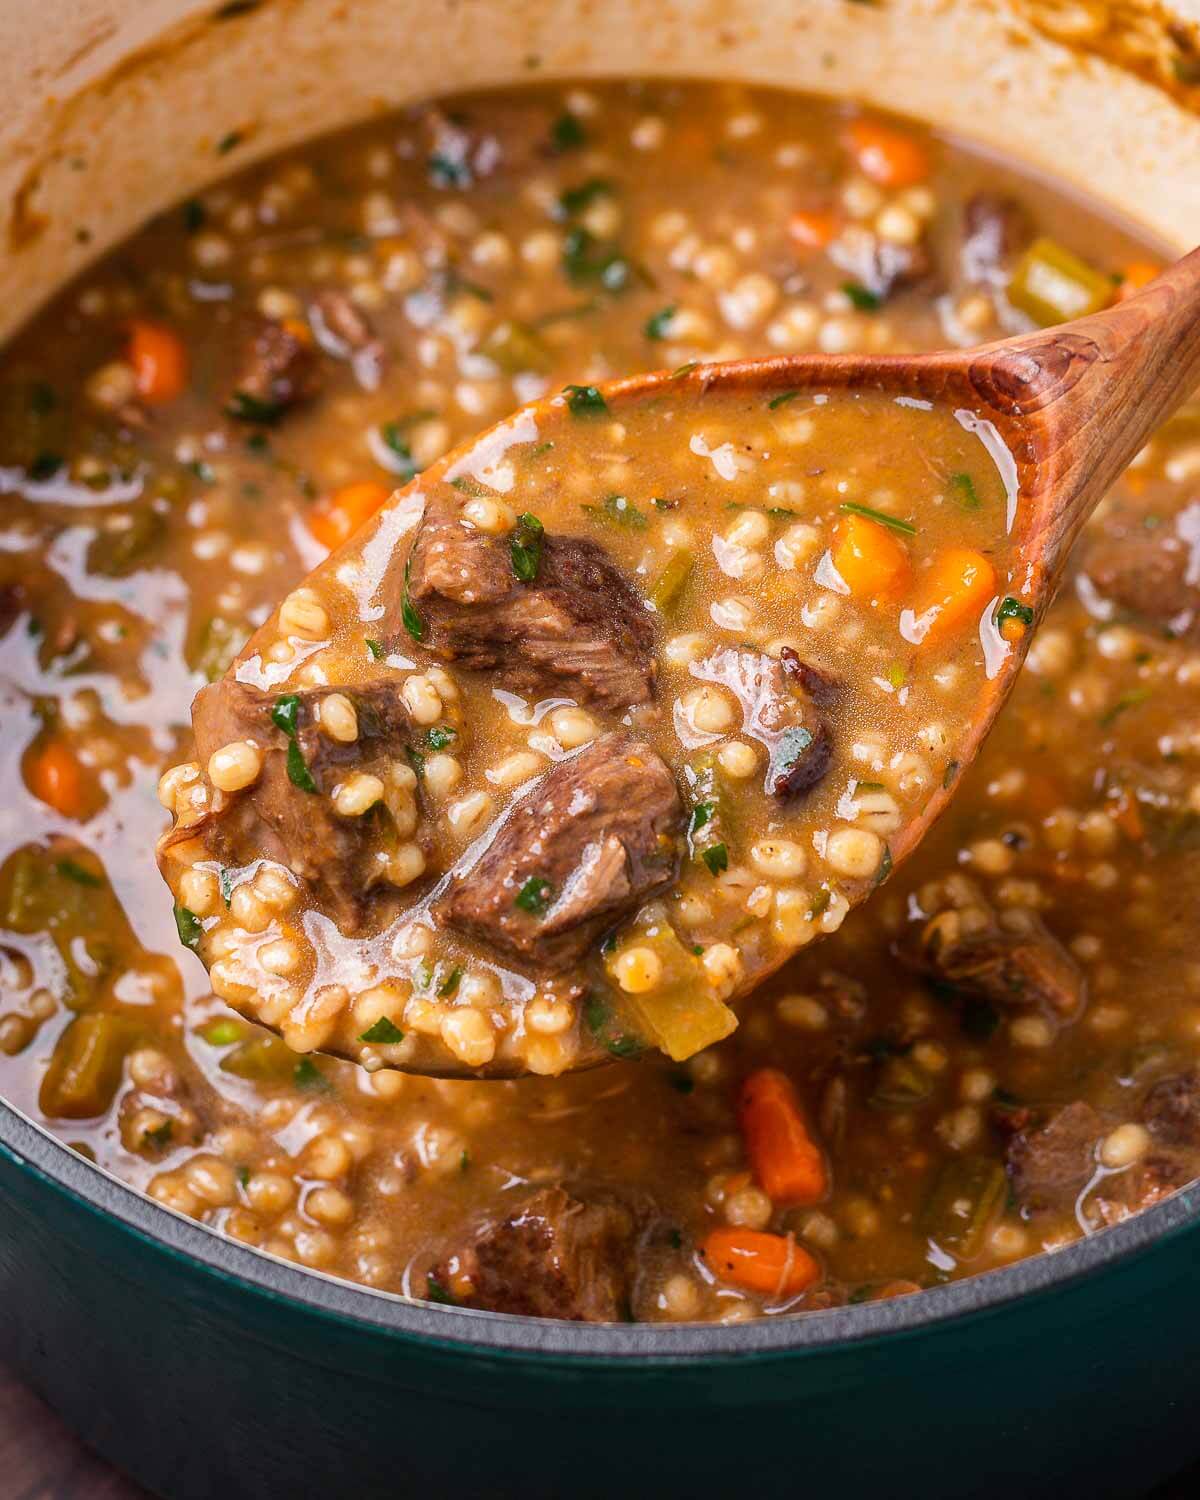 Large wooden ladle with beef barley soup over Dutch oven pot.